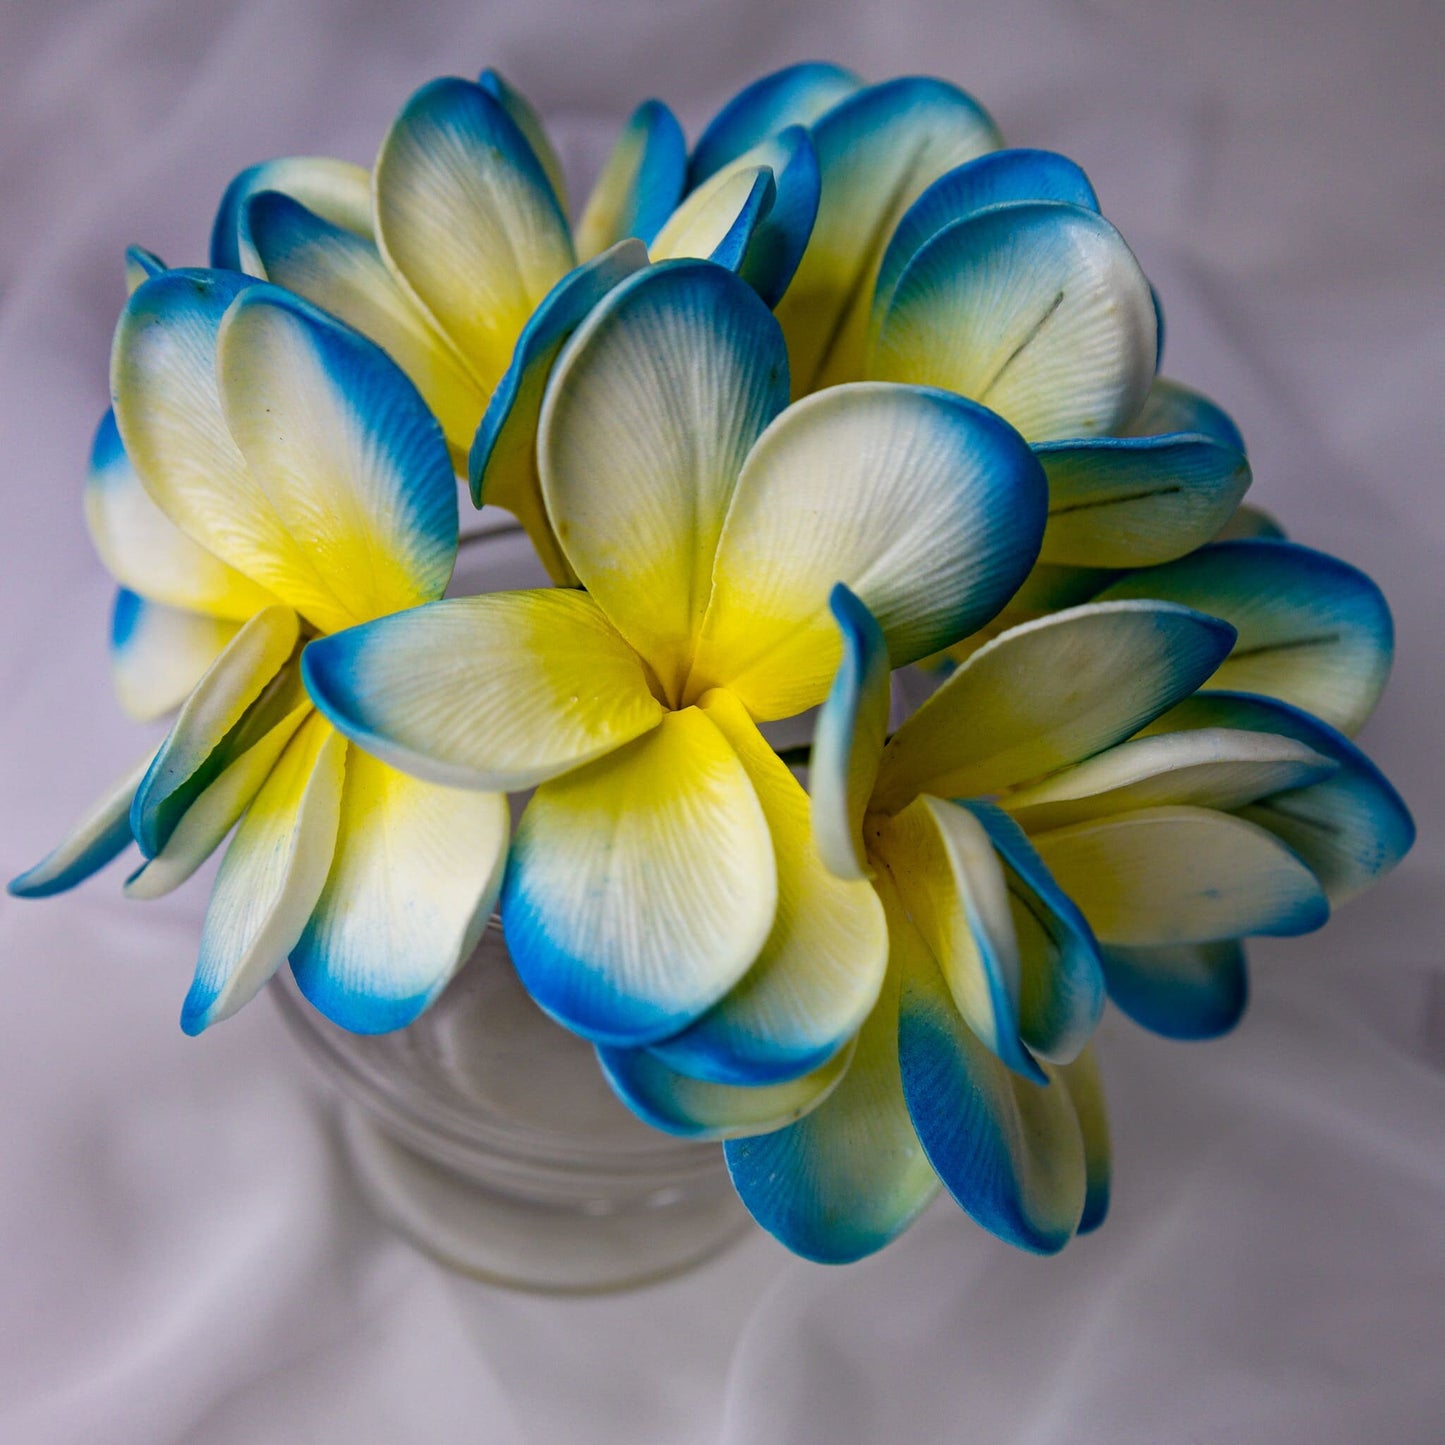 artificial skye blue frangipani flowers placed in transparent glass vase